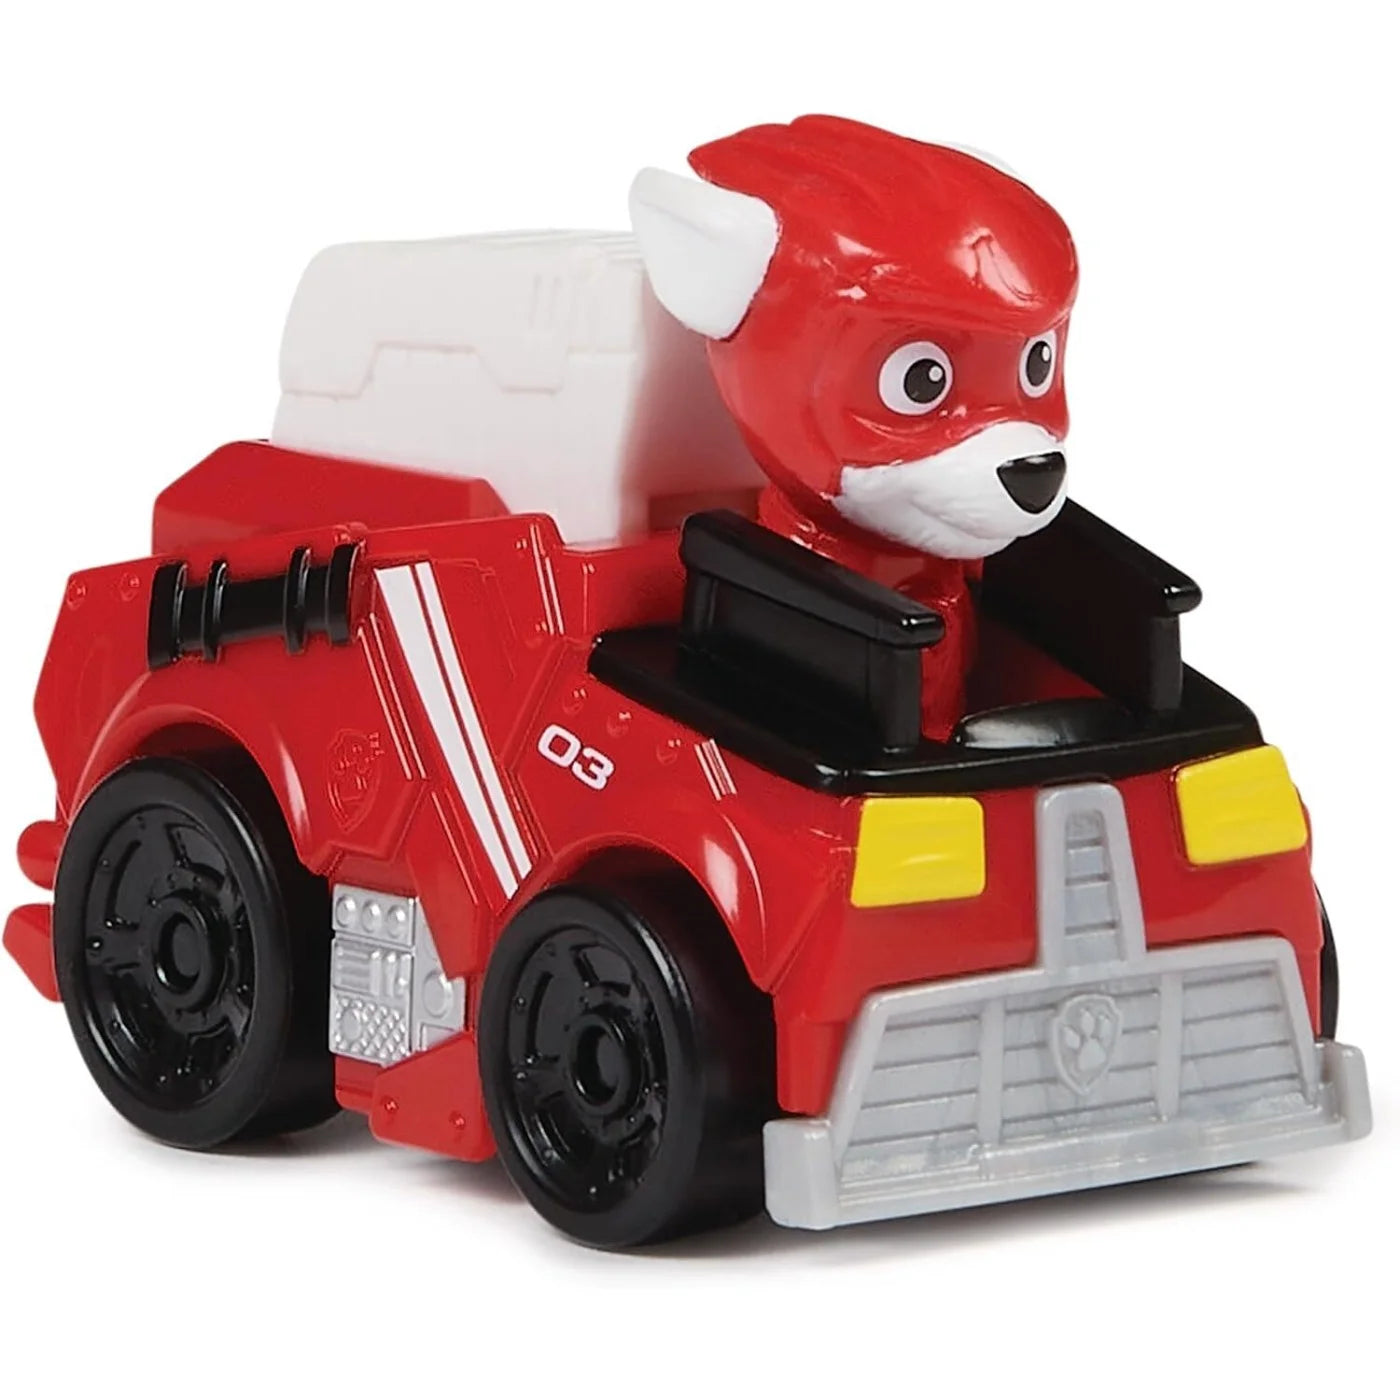 Paw Patrol Movie 2 Pup Squad Racers Assorted